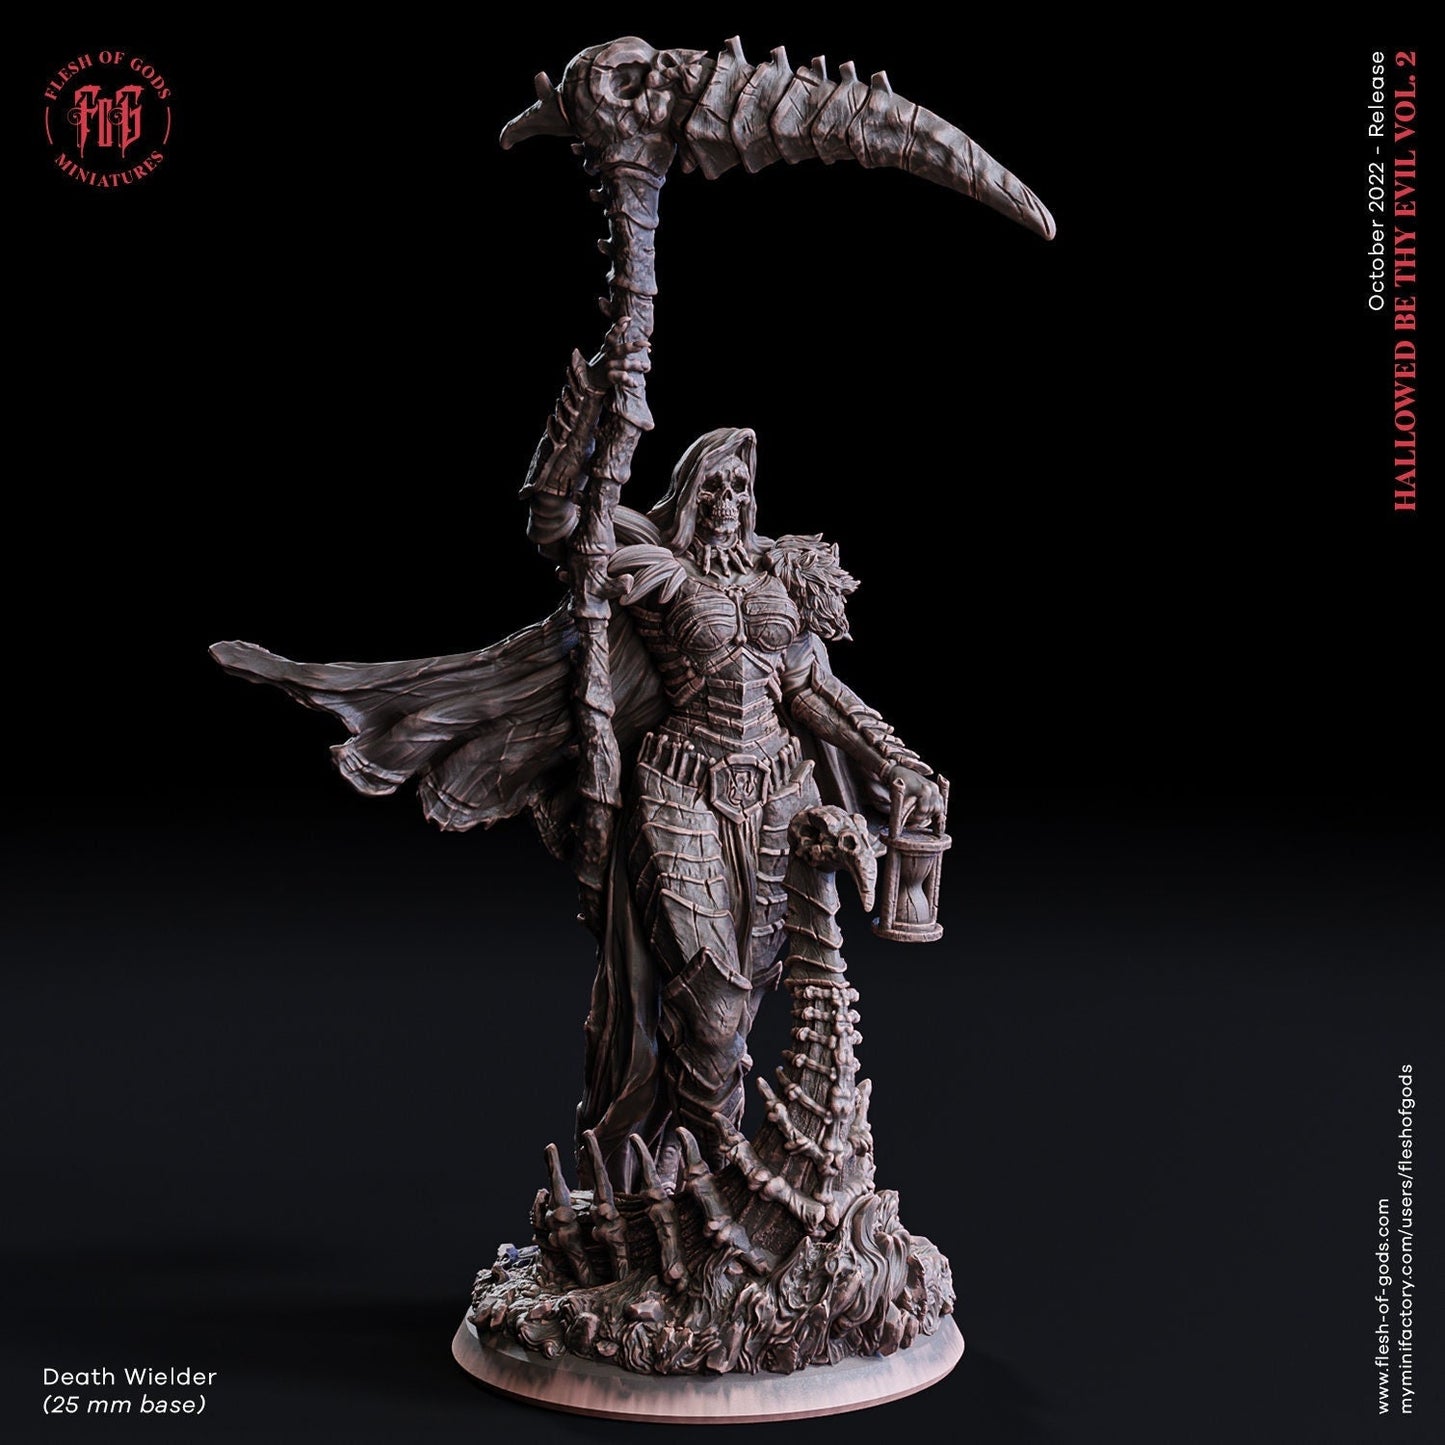 The Death Wielder | Flesh of Gods | Hero | 3D Printed Resin Miniature | Dungeons and Dragons | Pathfinder | Tabletop Role Playing | D&D